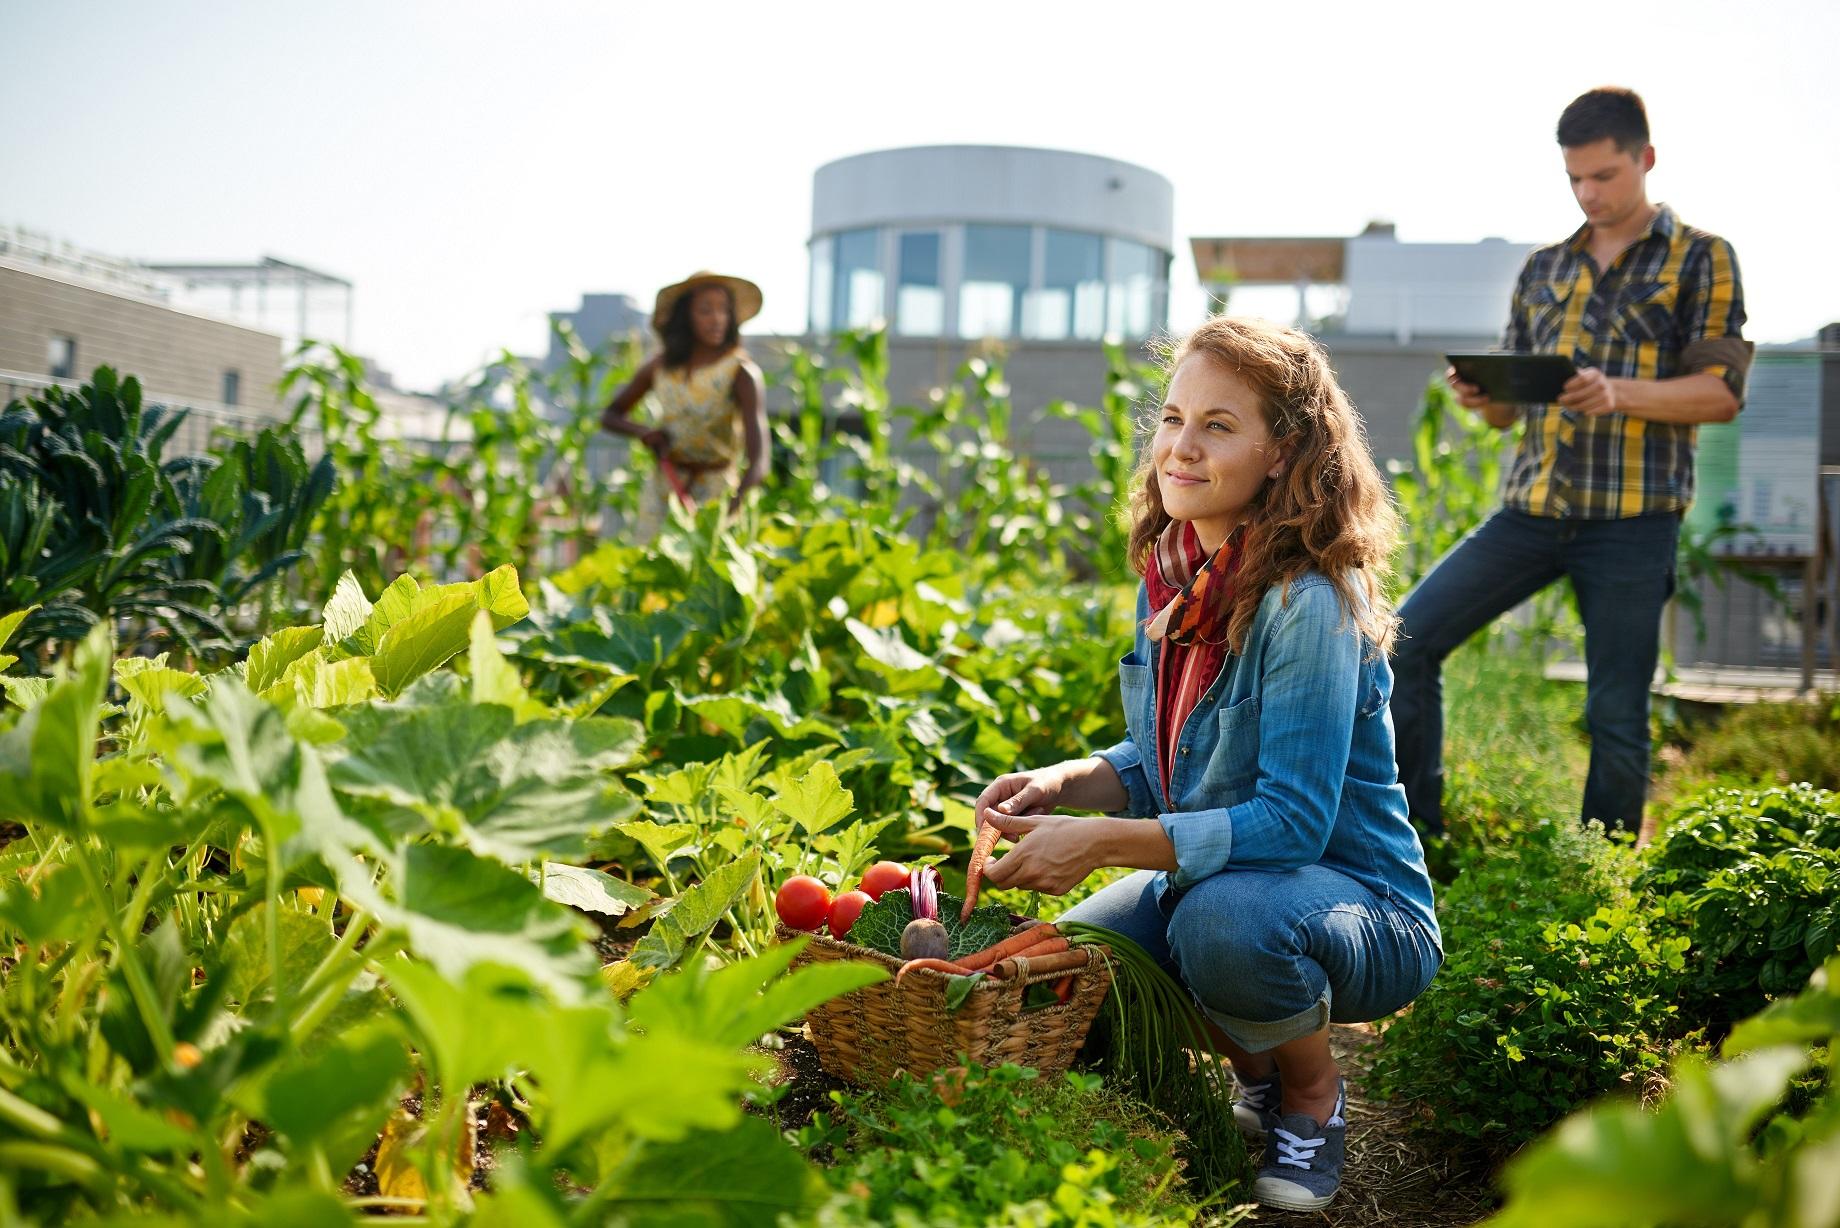 DCU to host workshop for community gardeners and food-growing enthusiasts